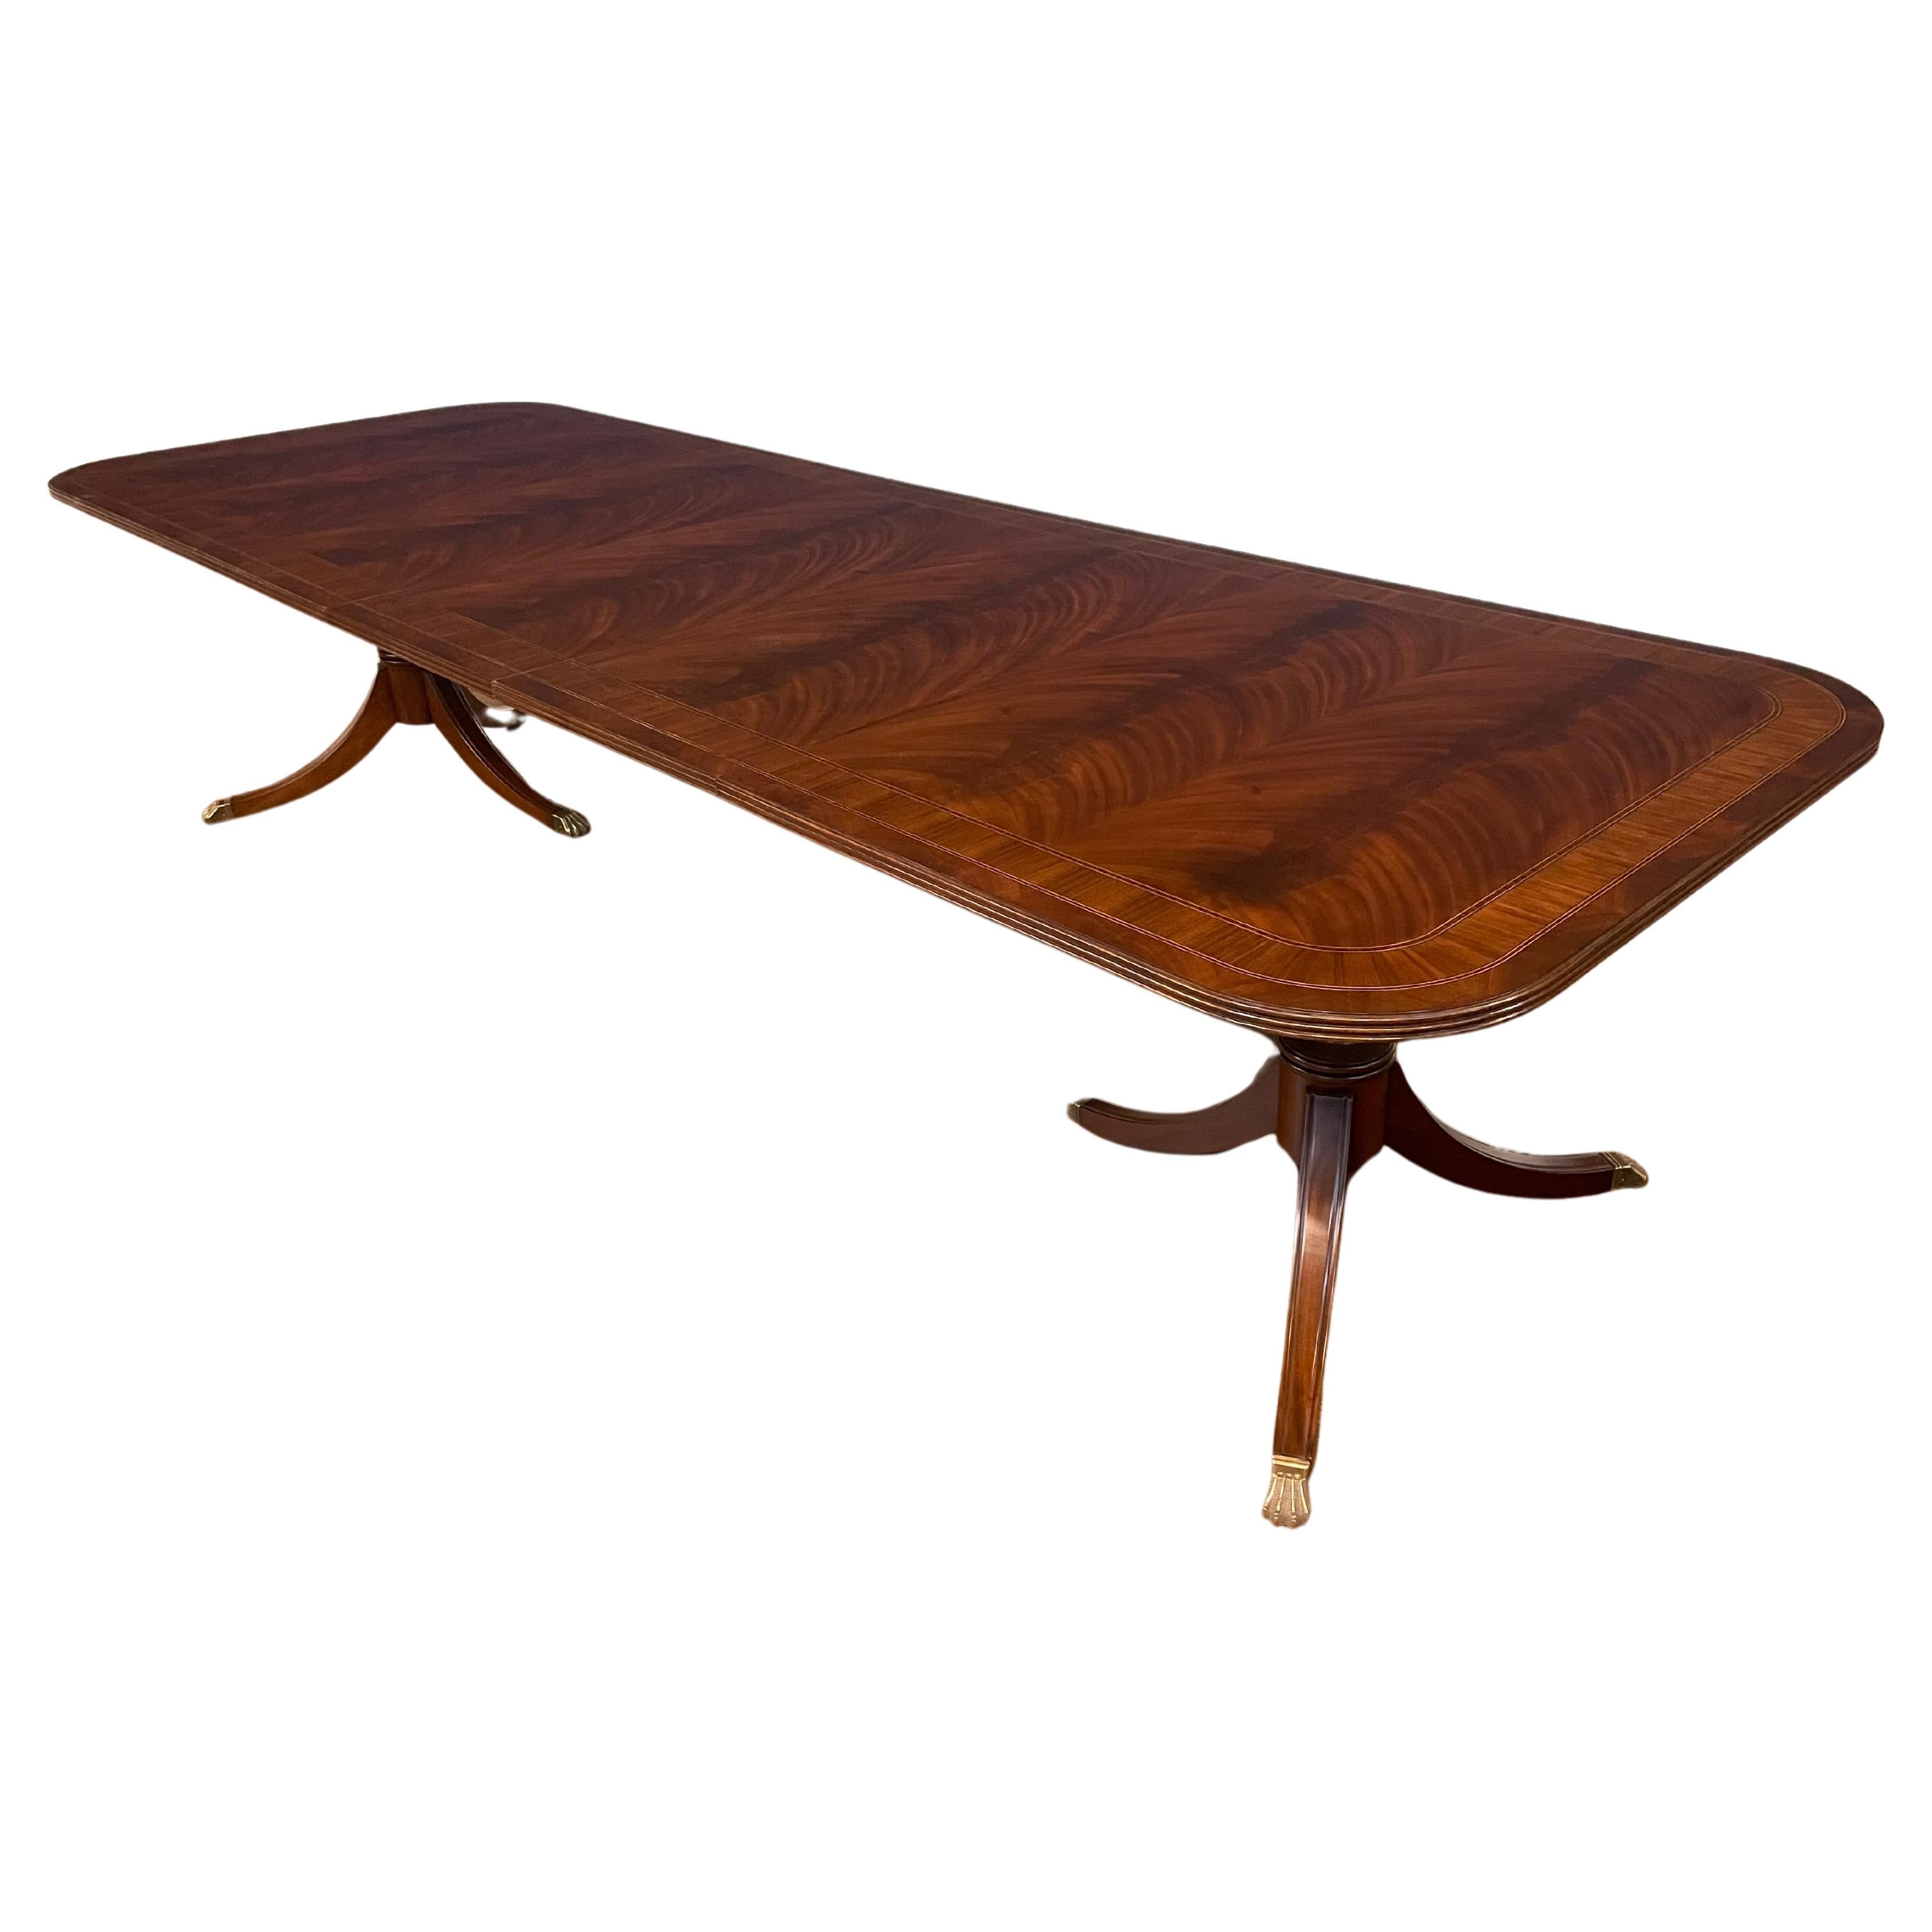 Multi-Banded Mahogany Dining Table by Leighton Hall - Showroom Sample